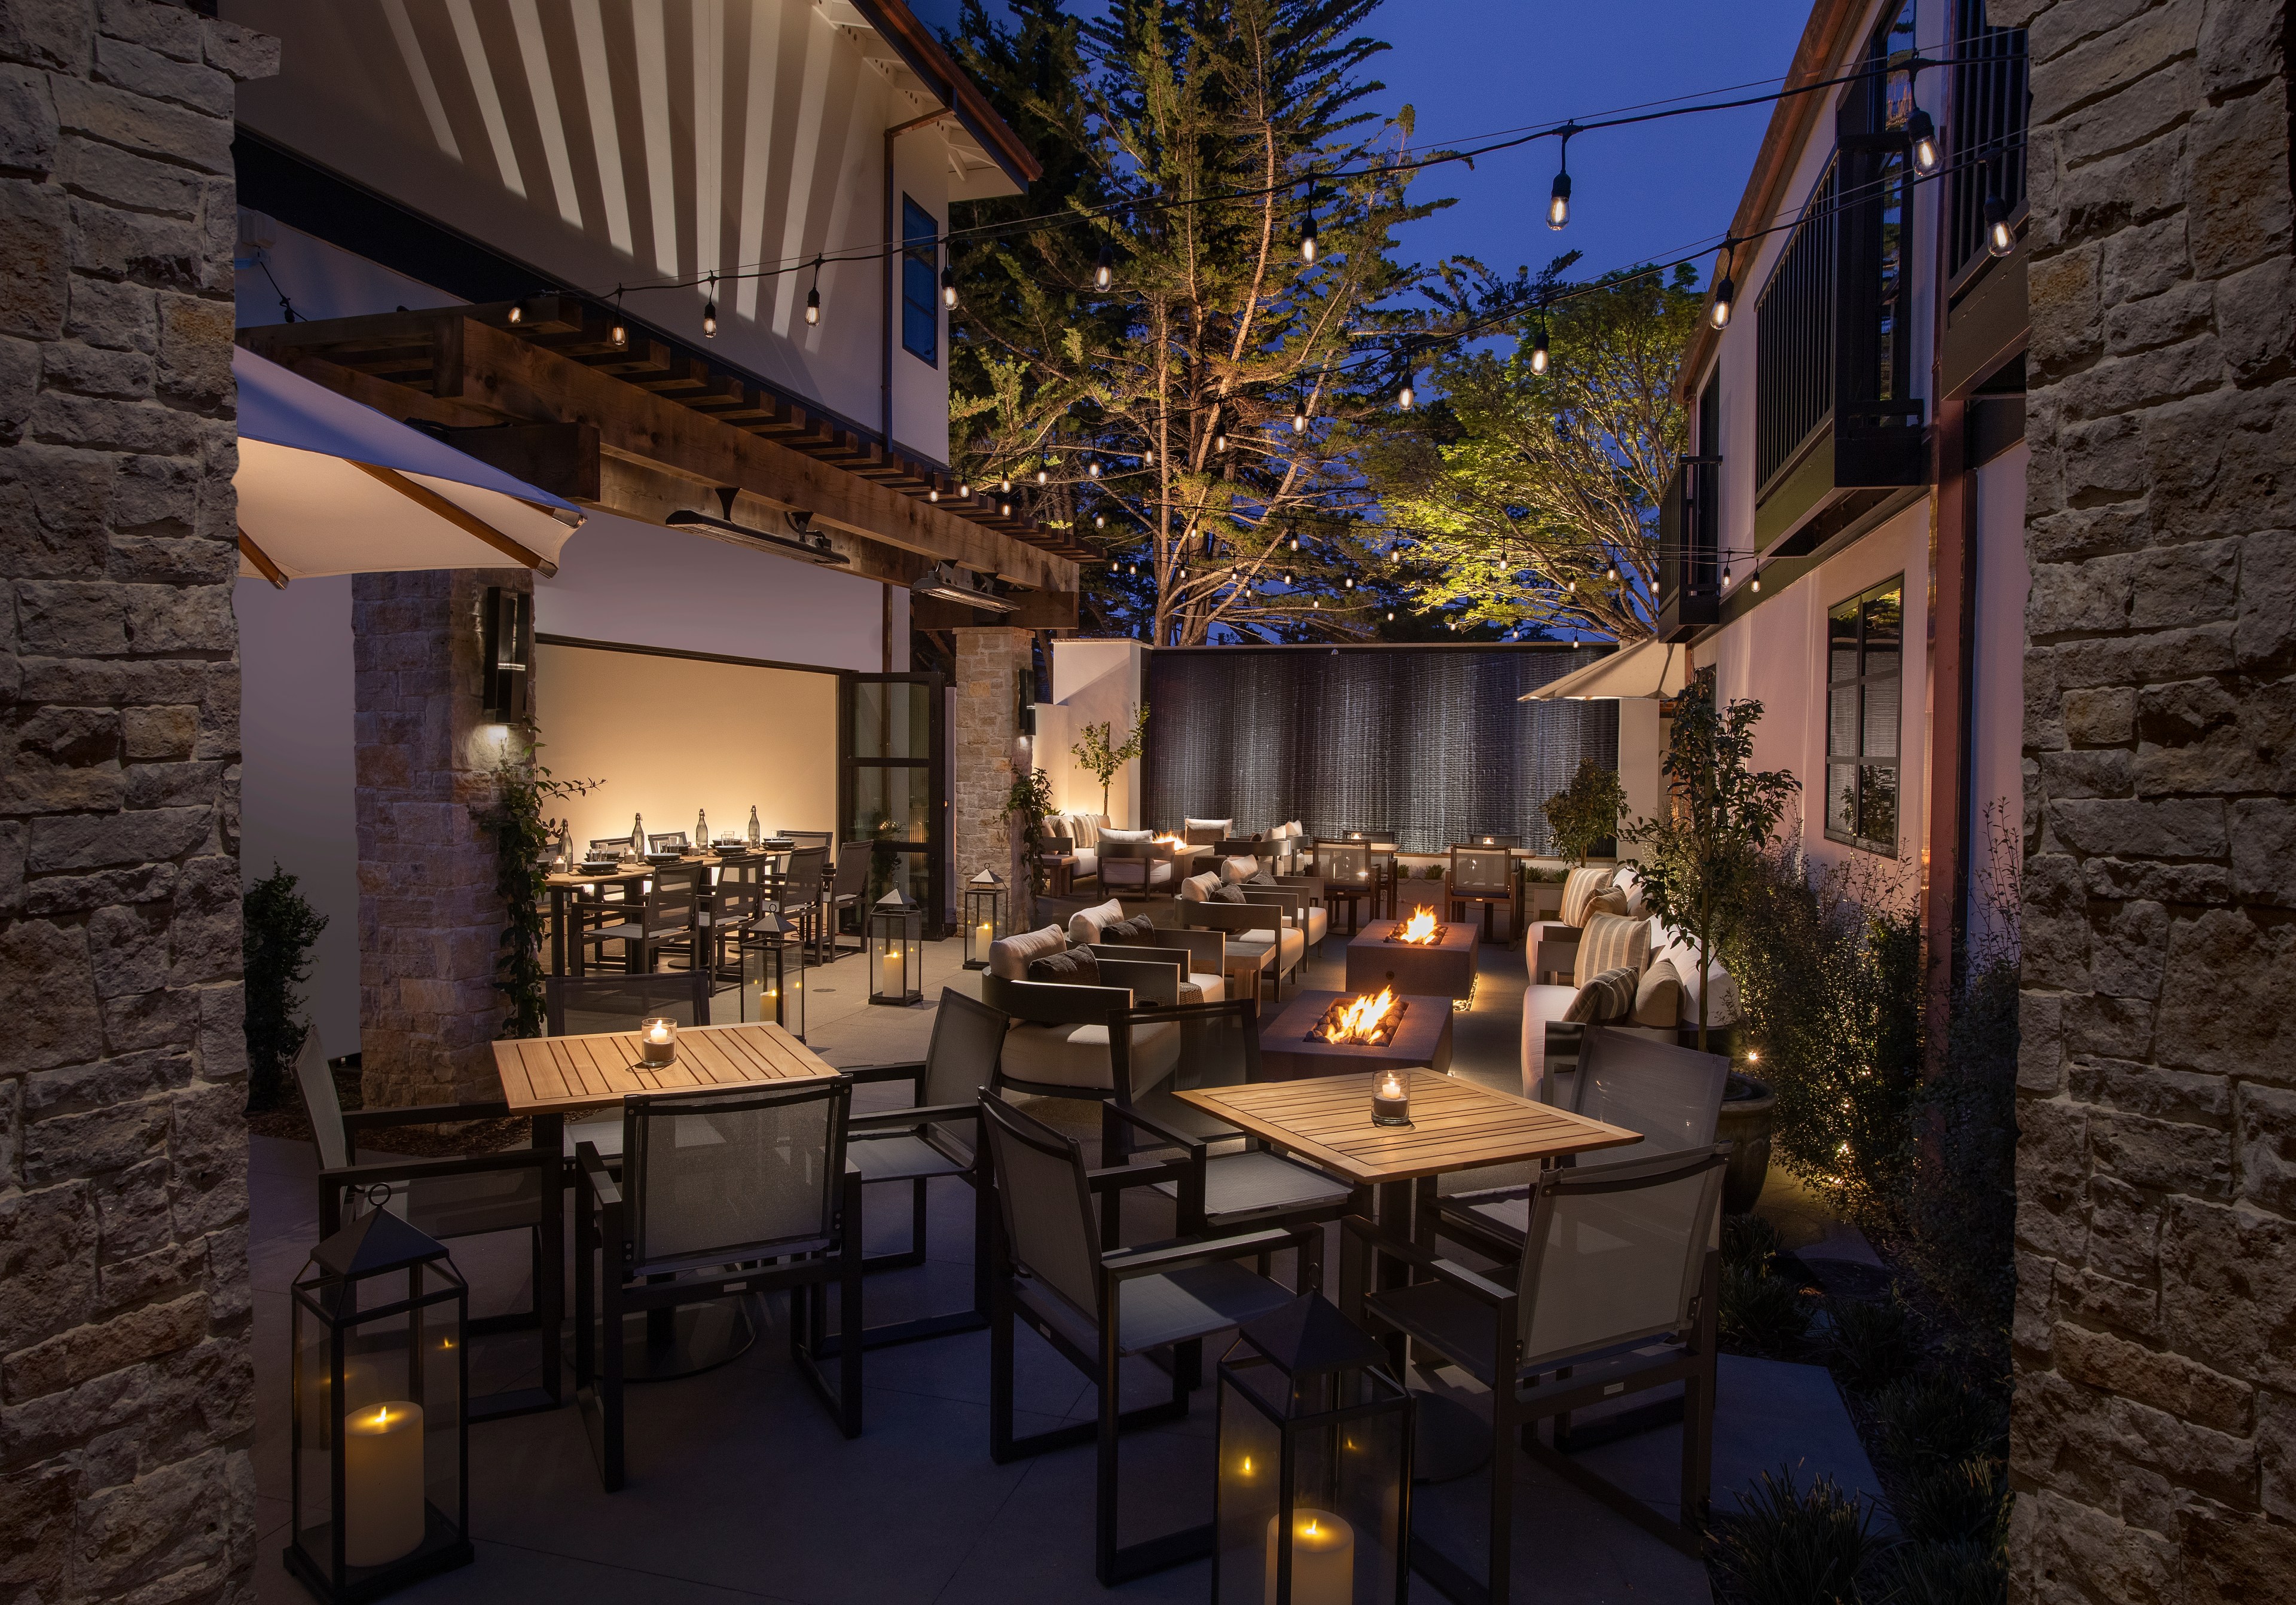 An enchanting outdoor patio scene at night is illuminated by string lights, with cozy seating, tables set with candles, and warm fire pits. Trees frame the background.